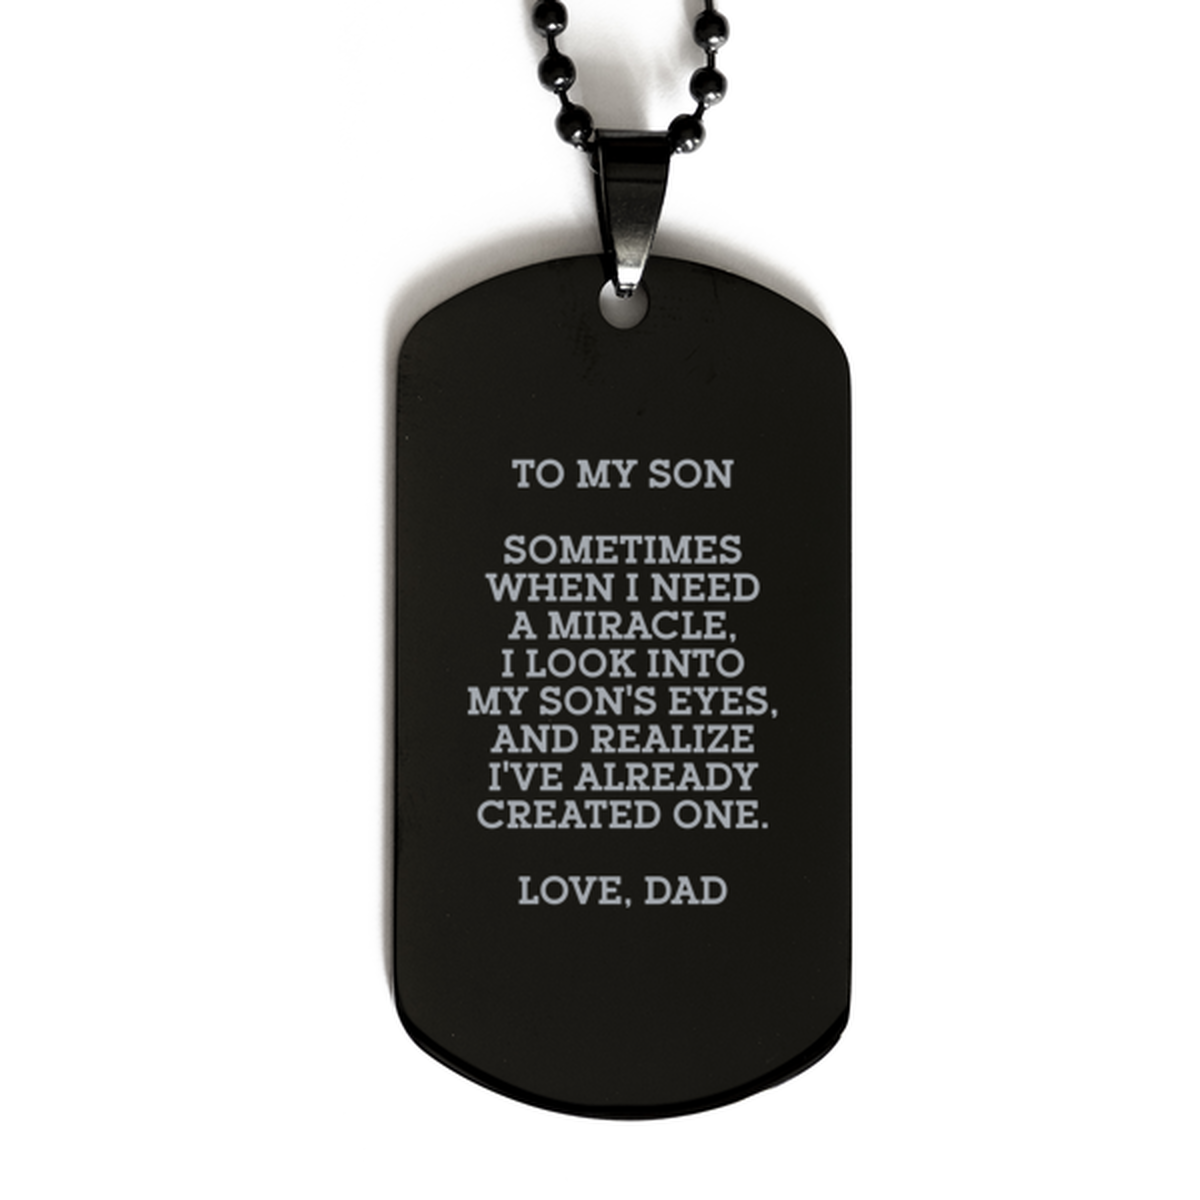 To My Son Black Dog Tag, Sometimes When I Need A Miracle, Graduation Day Gifts For Son From Dad, Birthday Gifts For Men